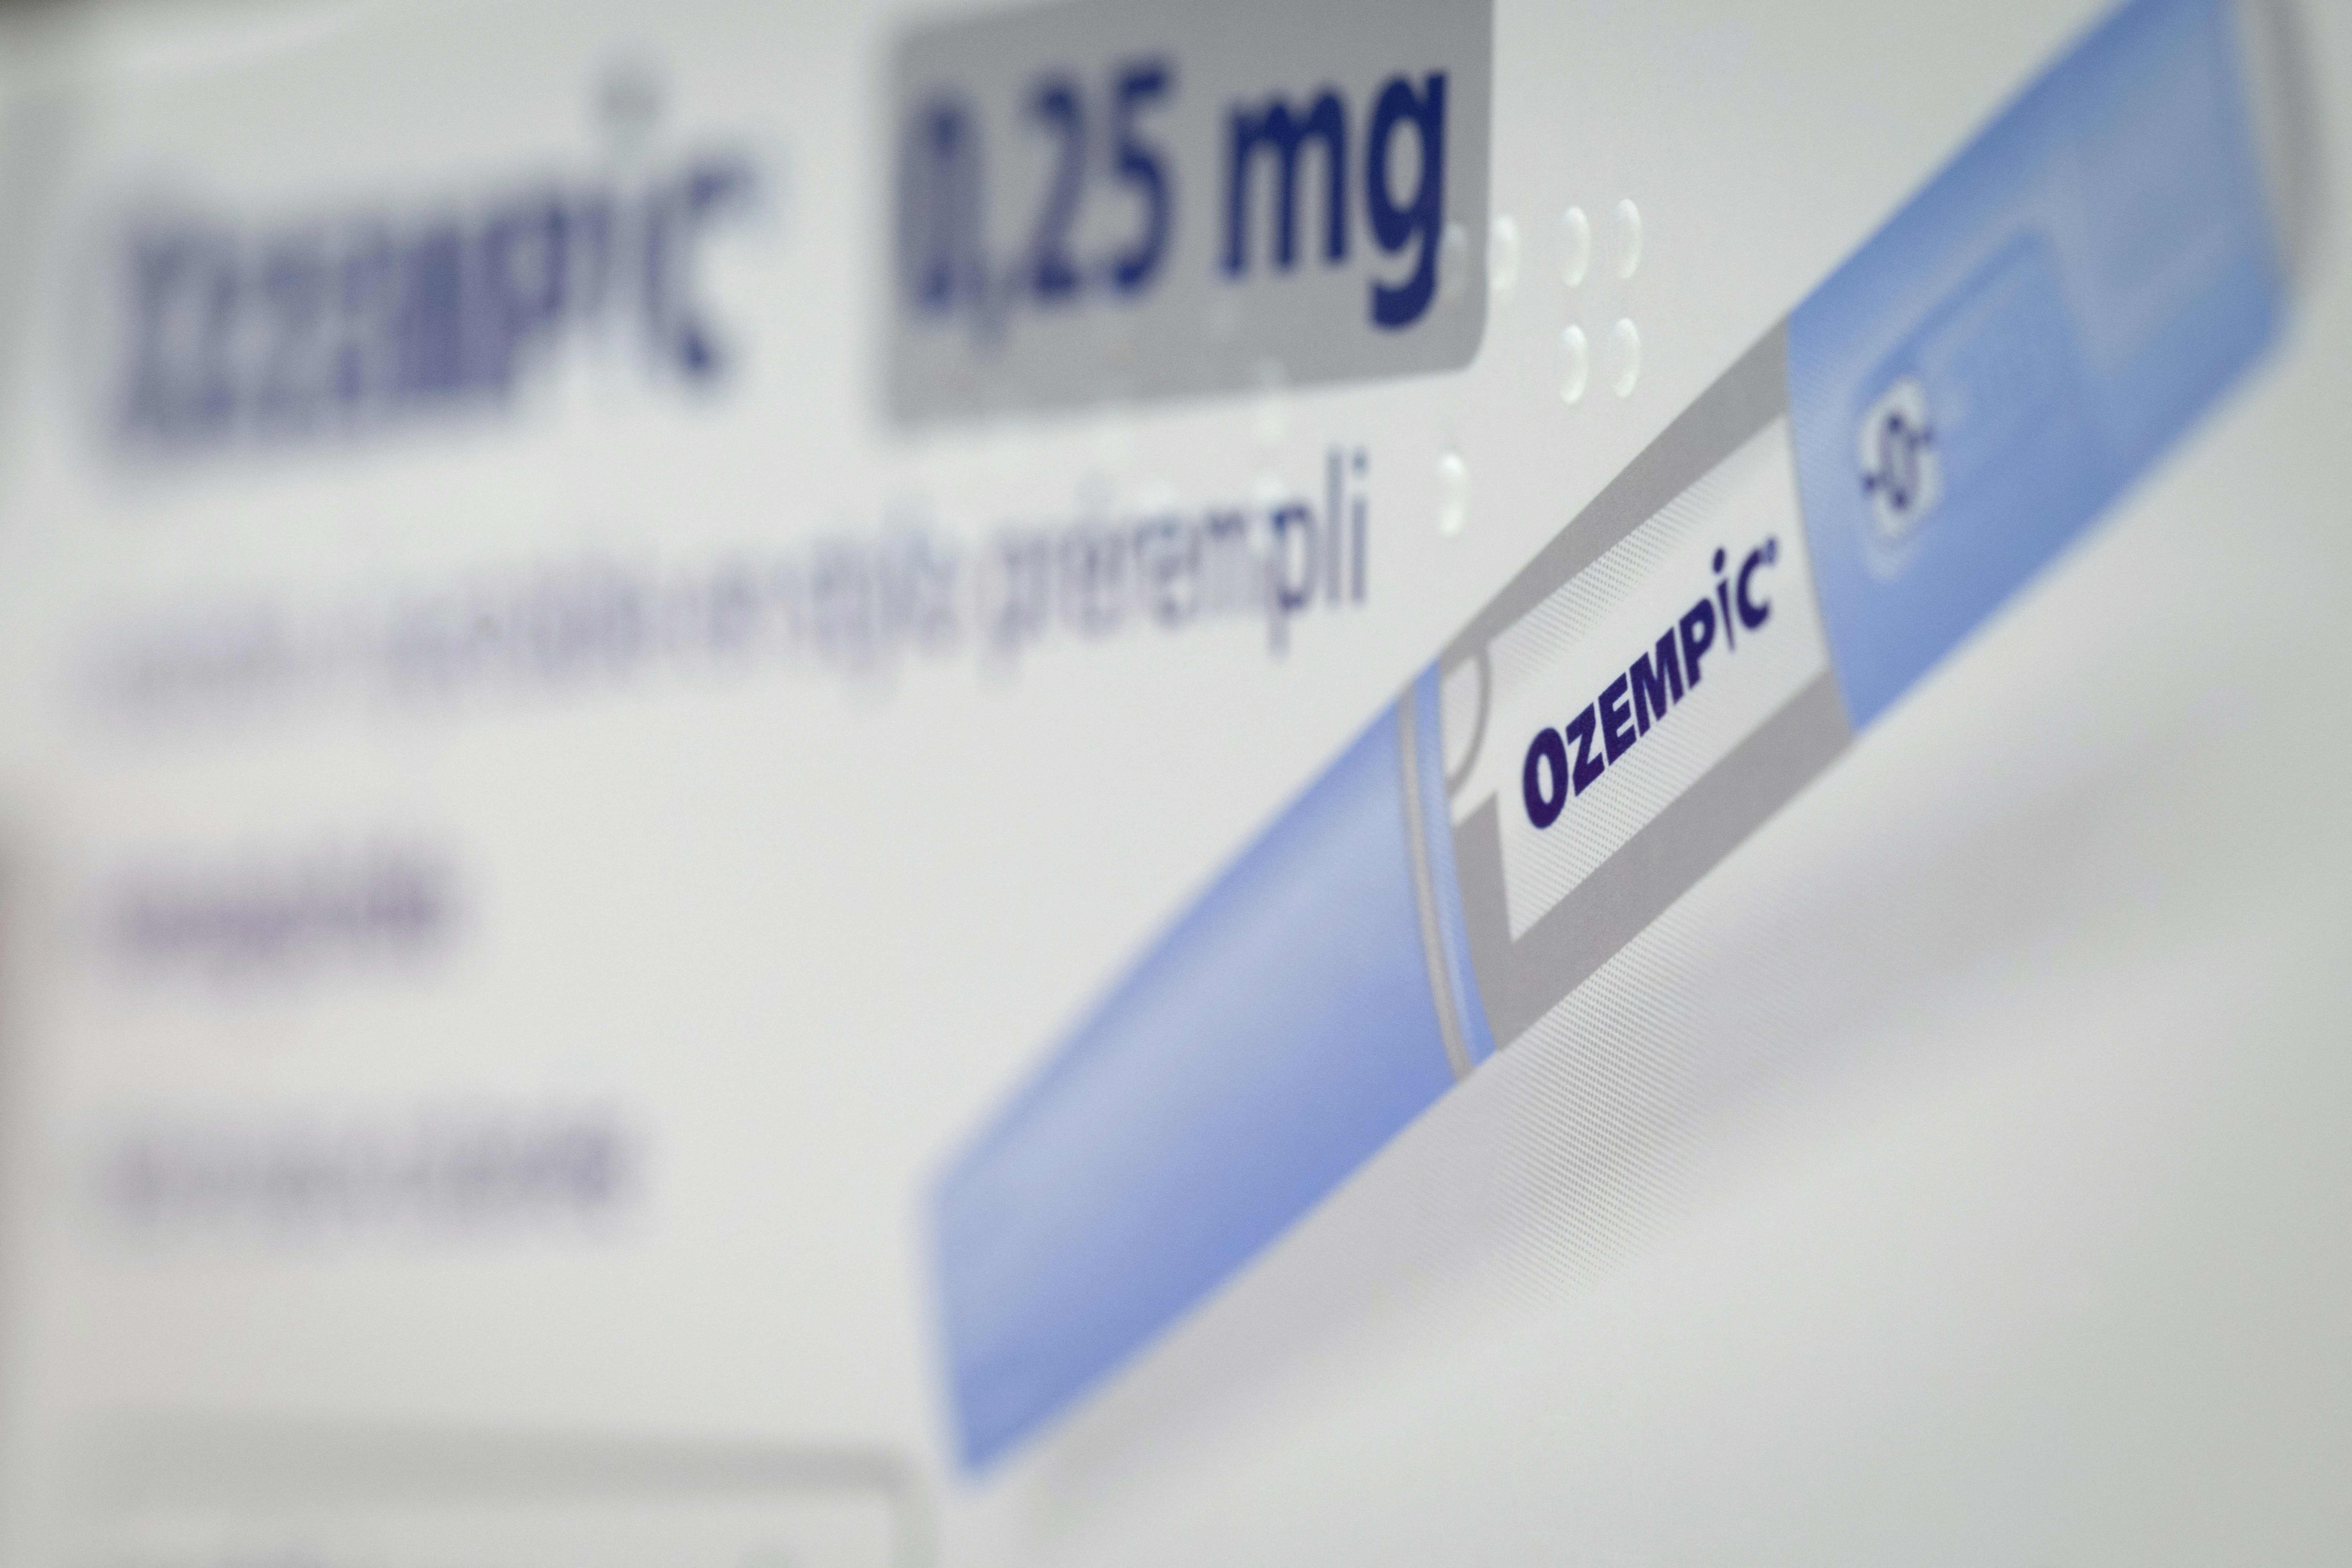 The anti-diabetic medication Ozempic (semaglutide) in France on Feb. 23, 2023. (Joel Saget/AFP—Getty Images)